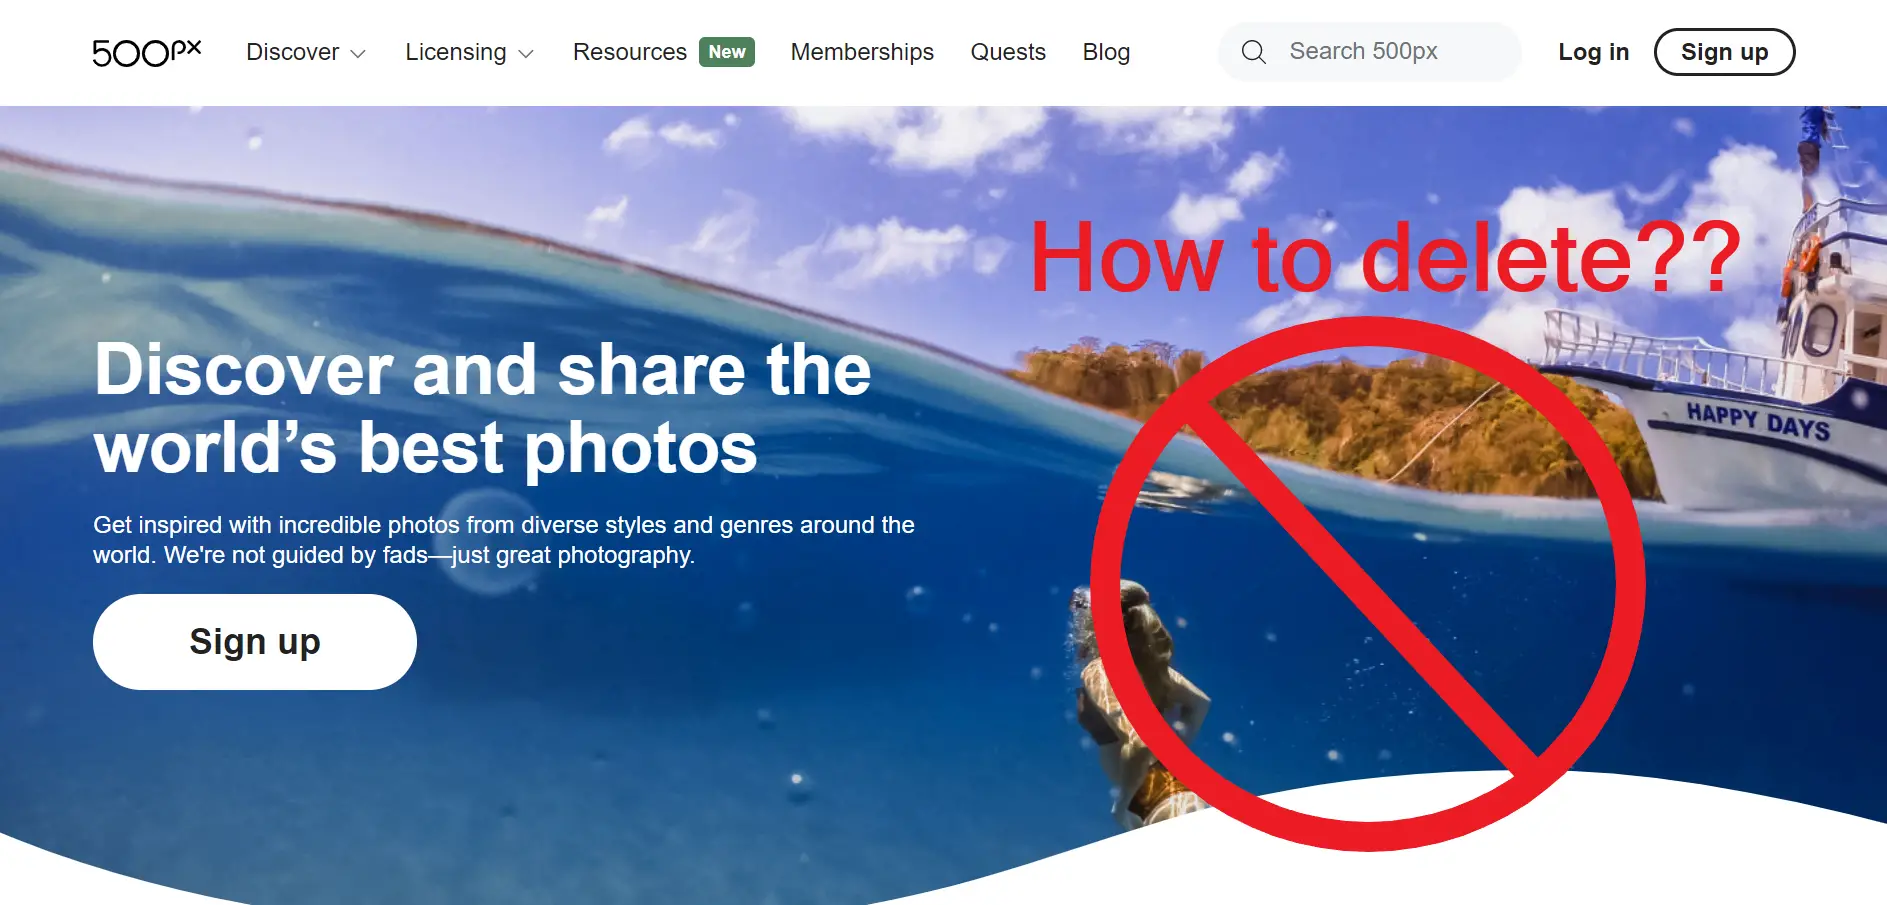 How to delete your 500px account?